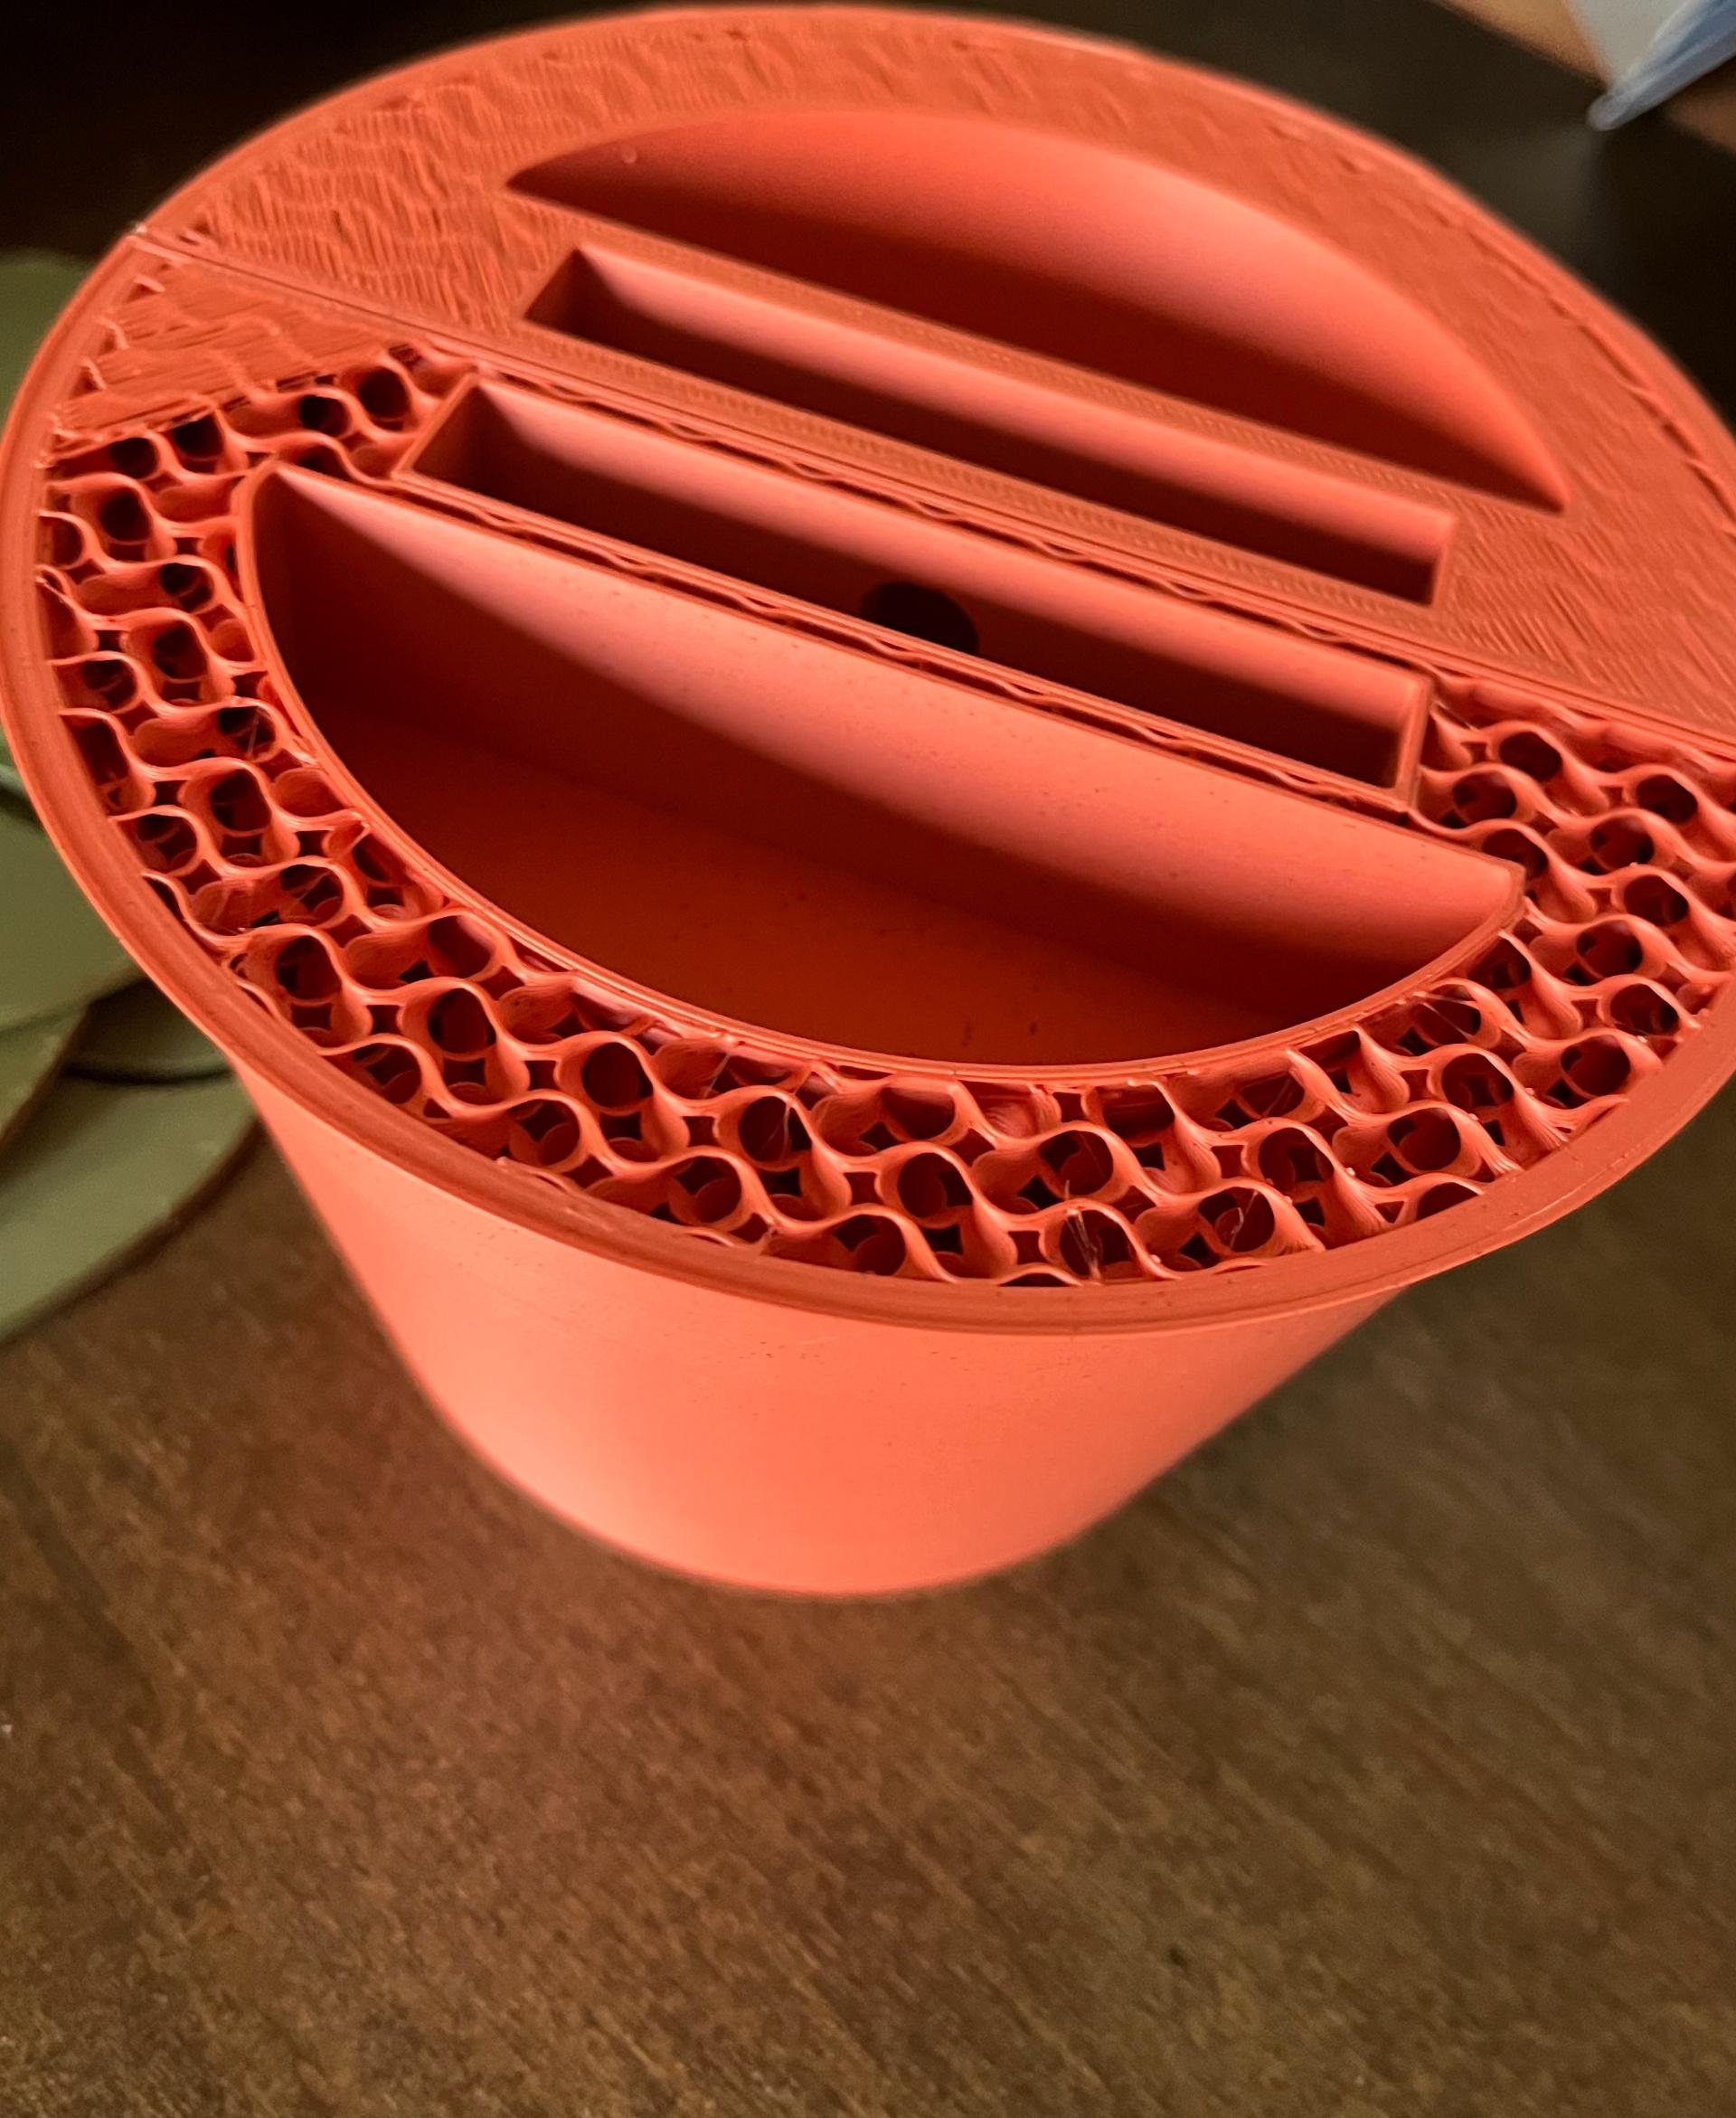 Bambookends - Bamboo Functional Plant with Pens, Highlighters, Post it note dispenser, and Bookmarks - My print failed at the last hour or so:/ this print takes 300+g of filament so i dont want another failure. Any suggestions?  - 3d model